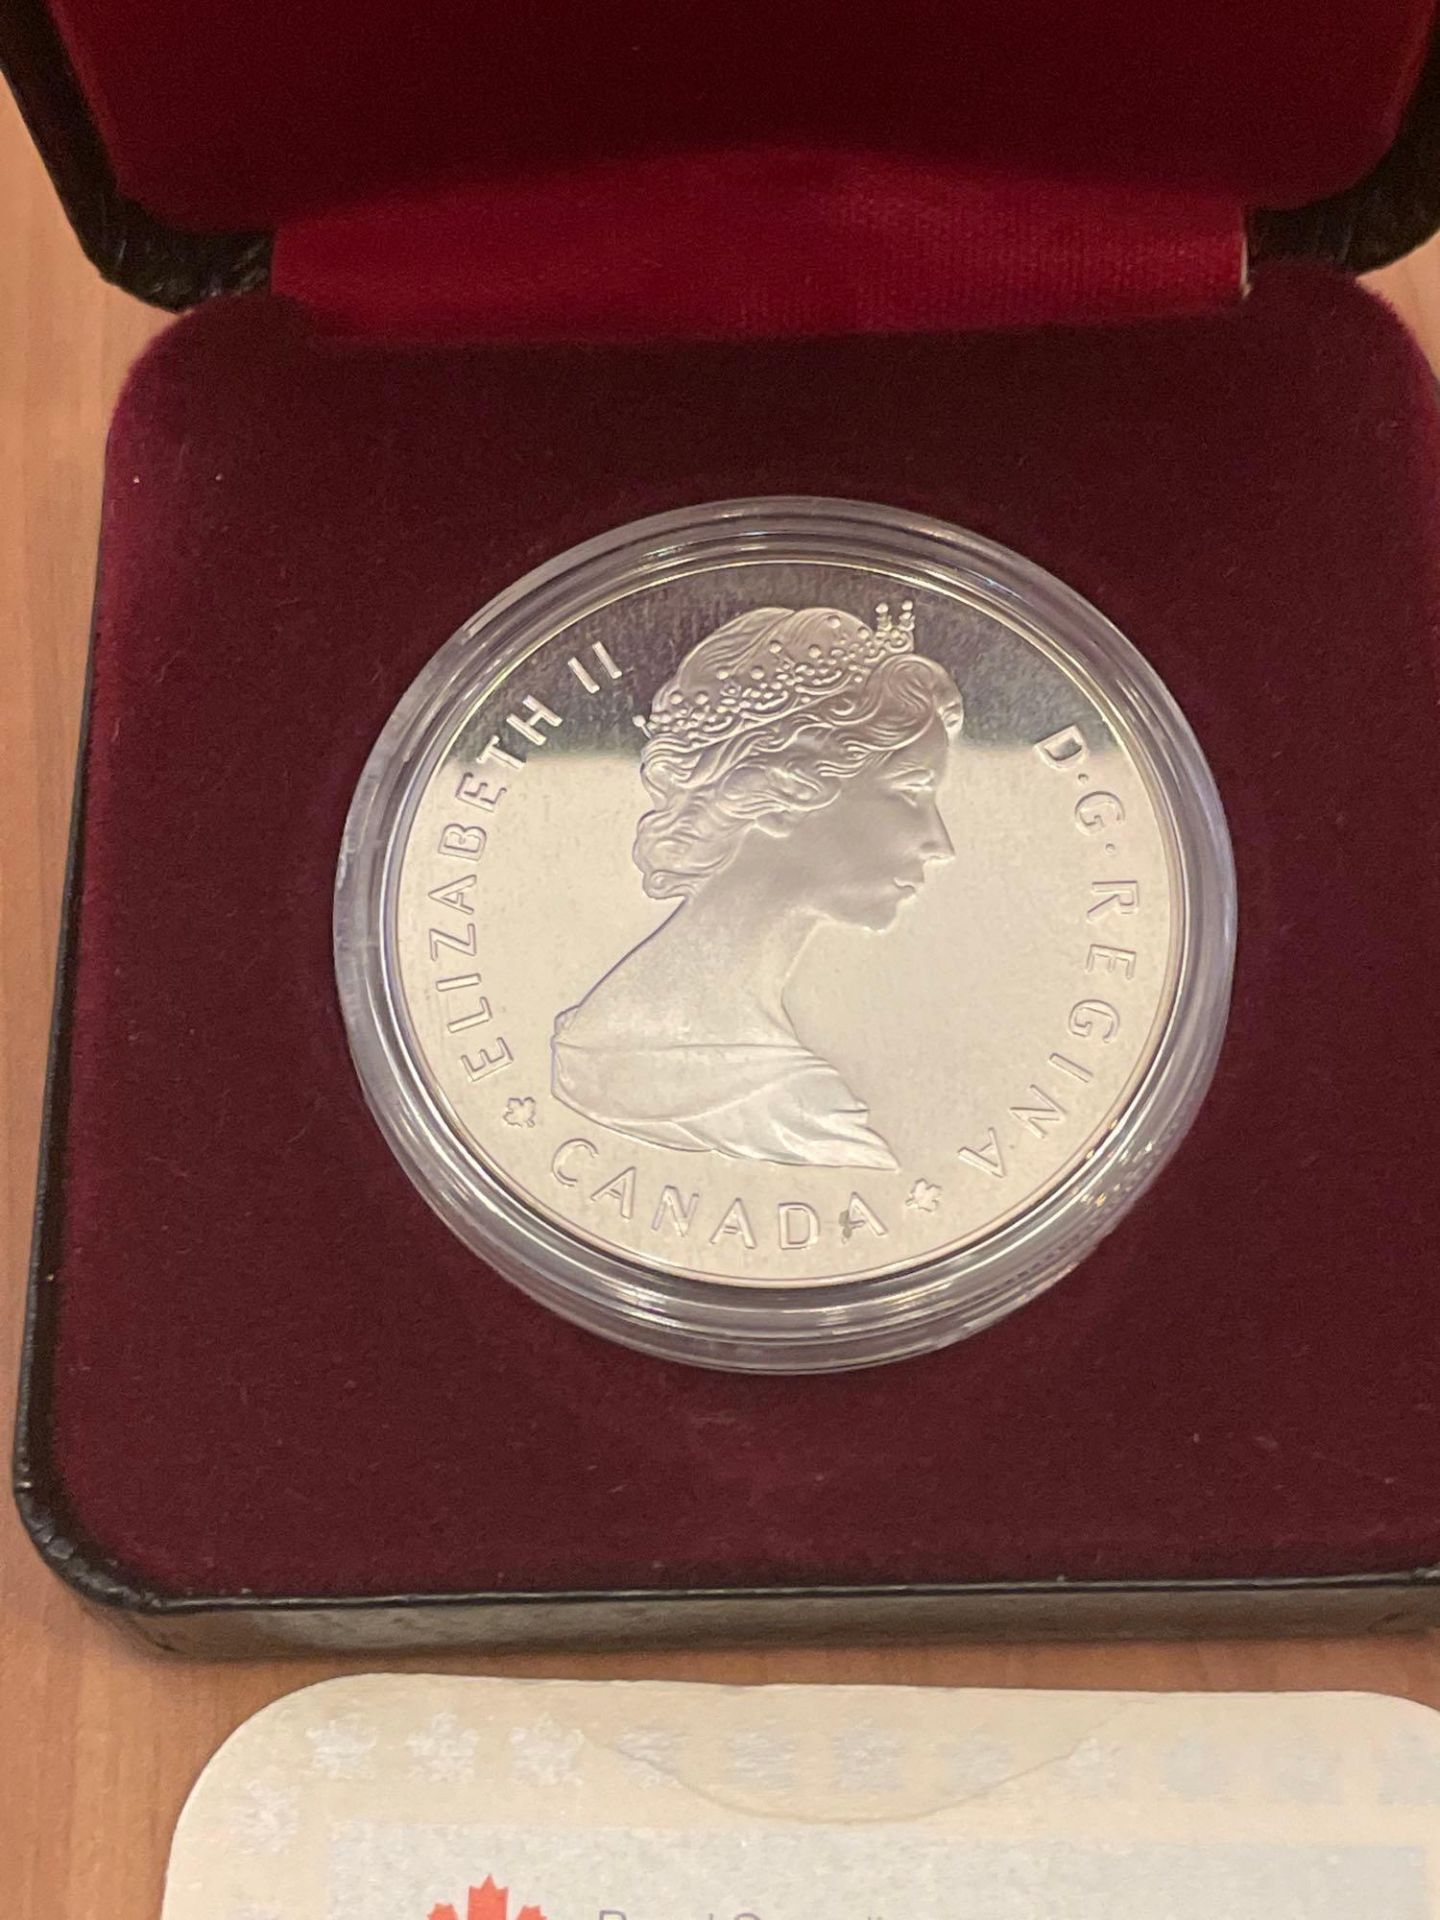 1985 Canadian National Parks .500 Silver Proof Dollar - Image 3 of 6